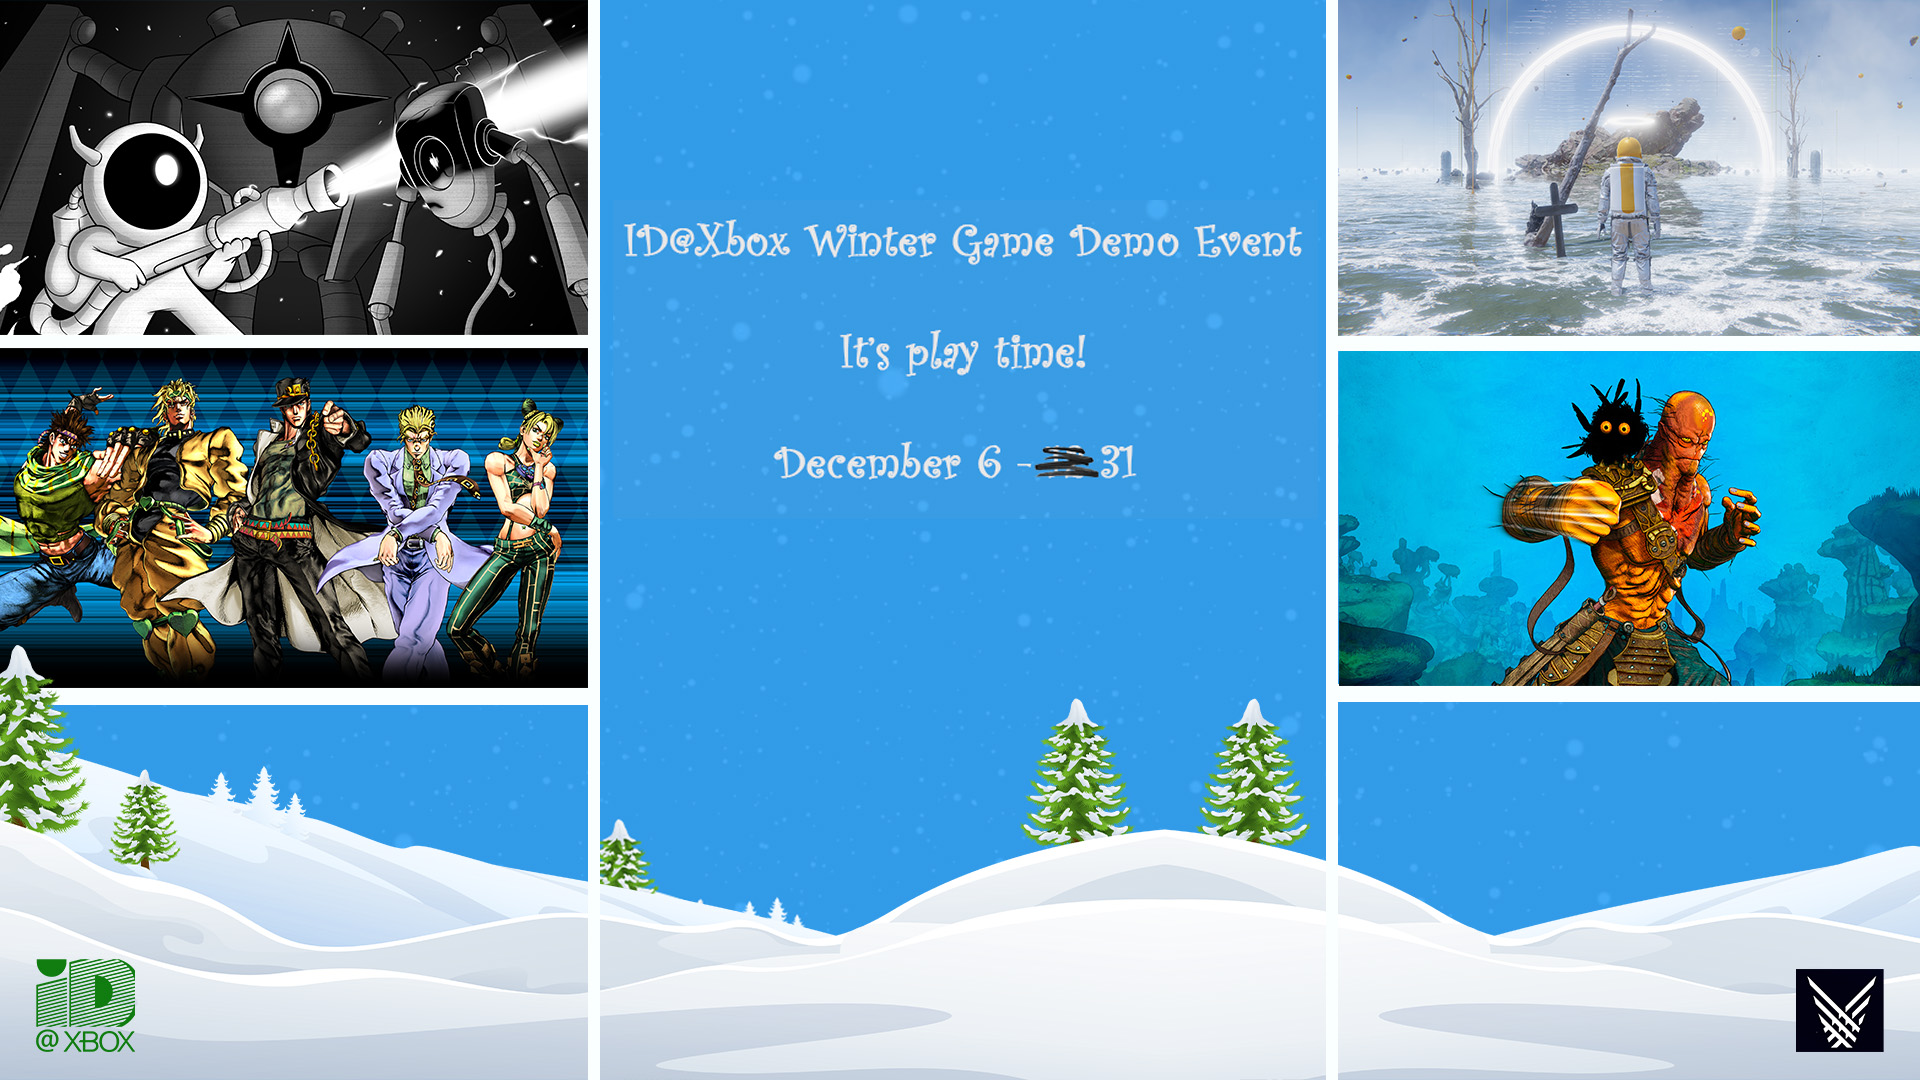 Xbox's Winterfest event starts today with 33 demos of indie games